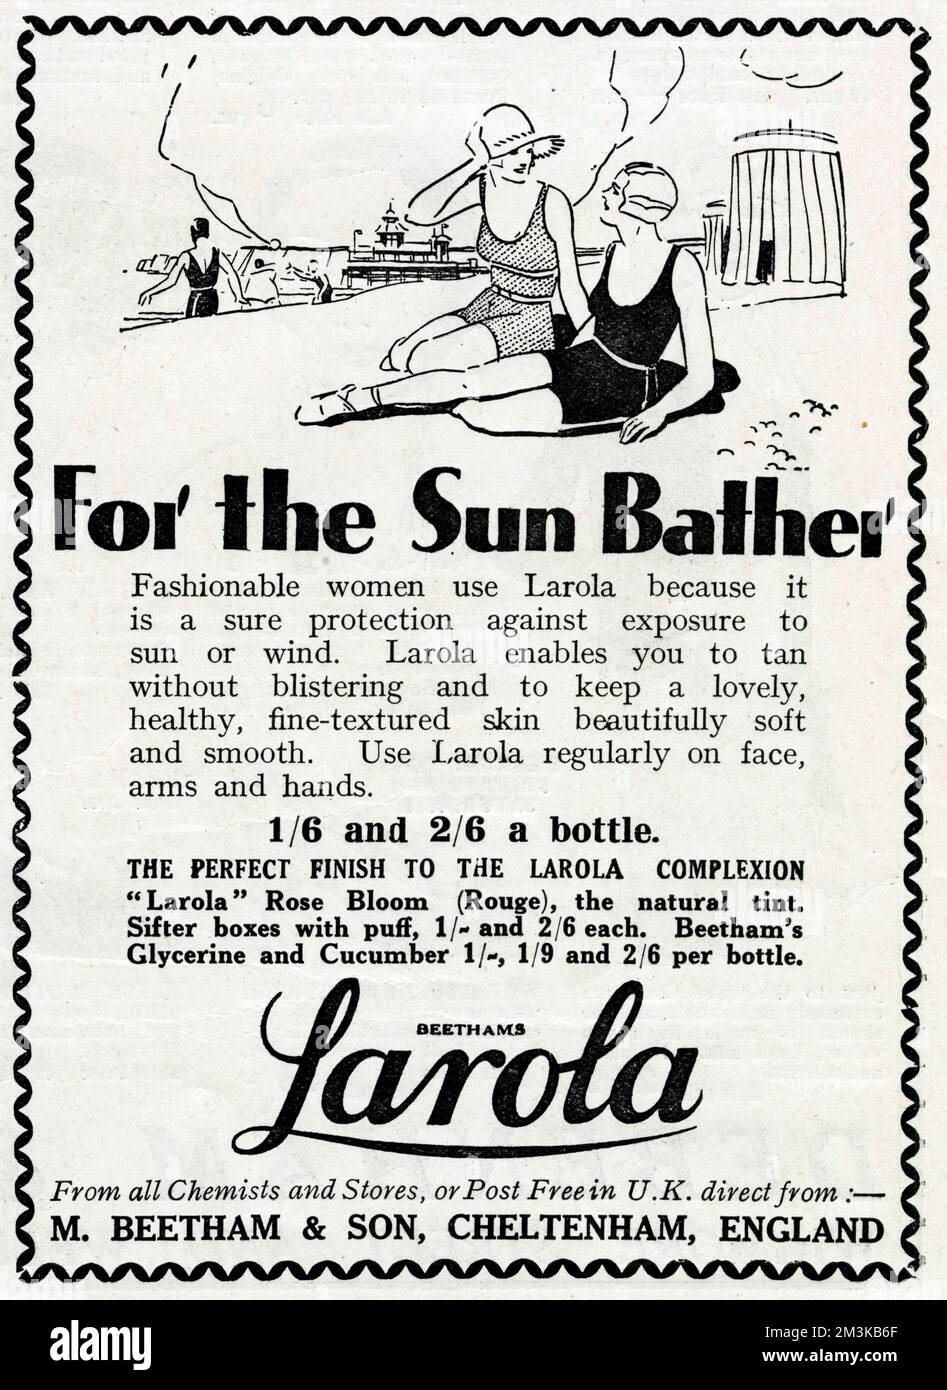 'For the sun bather' Fashionable women use Larola because it is a sure protection against exposure to sun or wind.  Larola enables you to tan without blistering and keep a lovely, healthy, fine-textured skin beautifully soft and smooth.     Date: 1931 Stock Photo